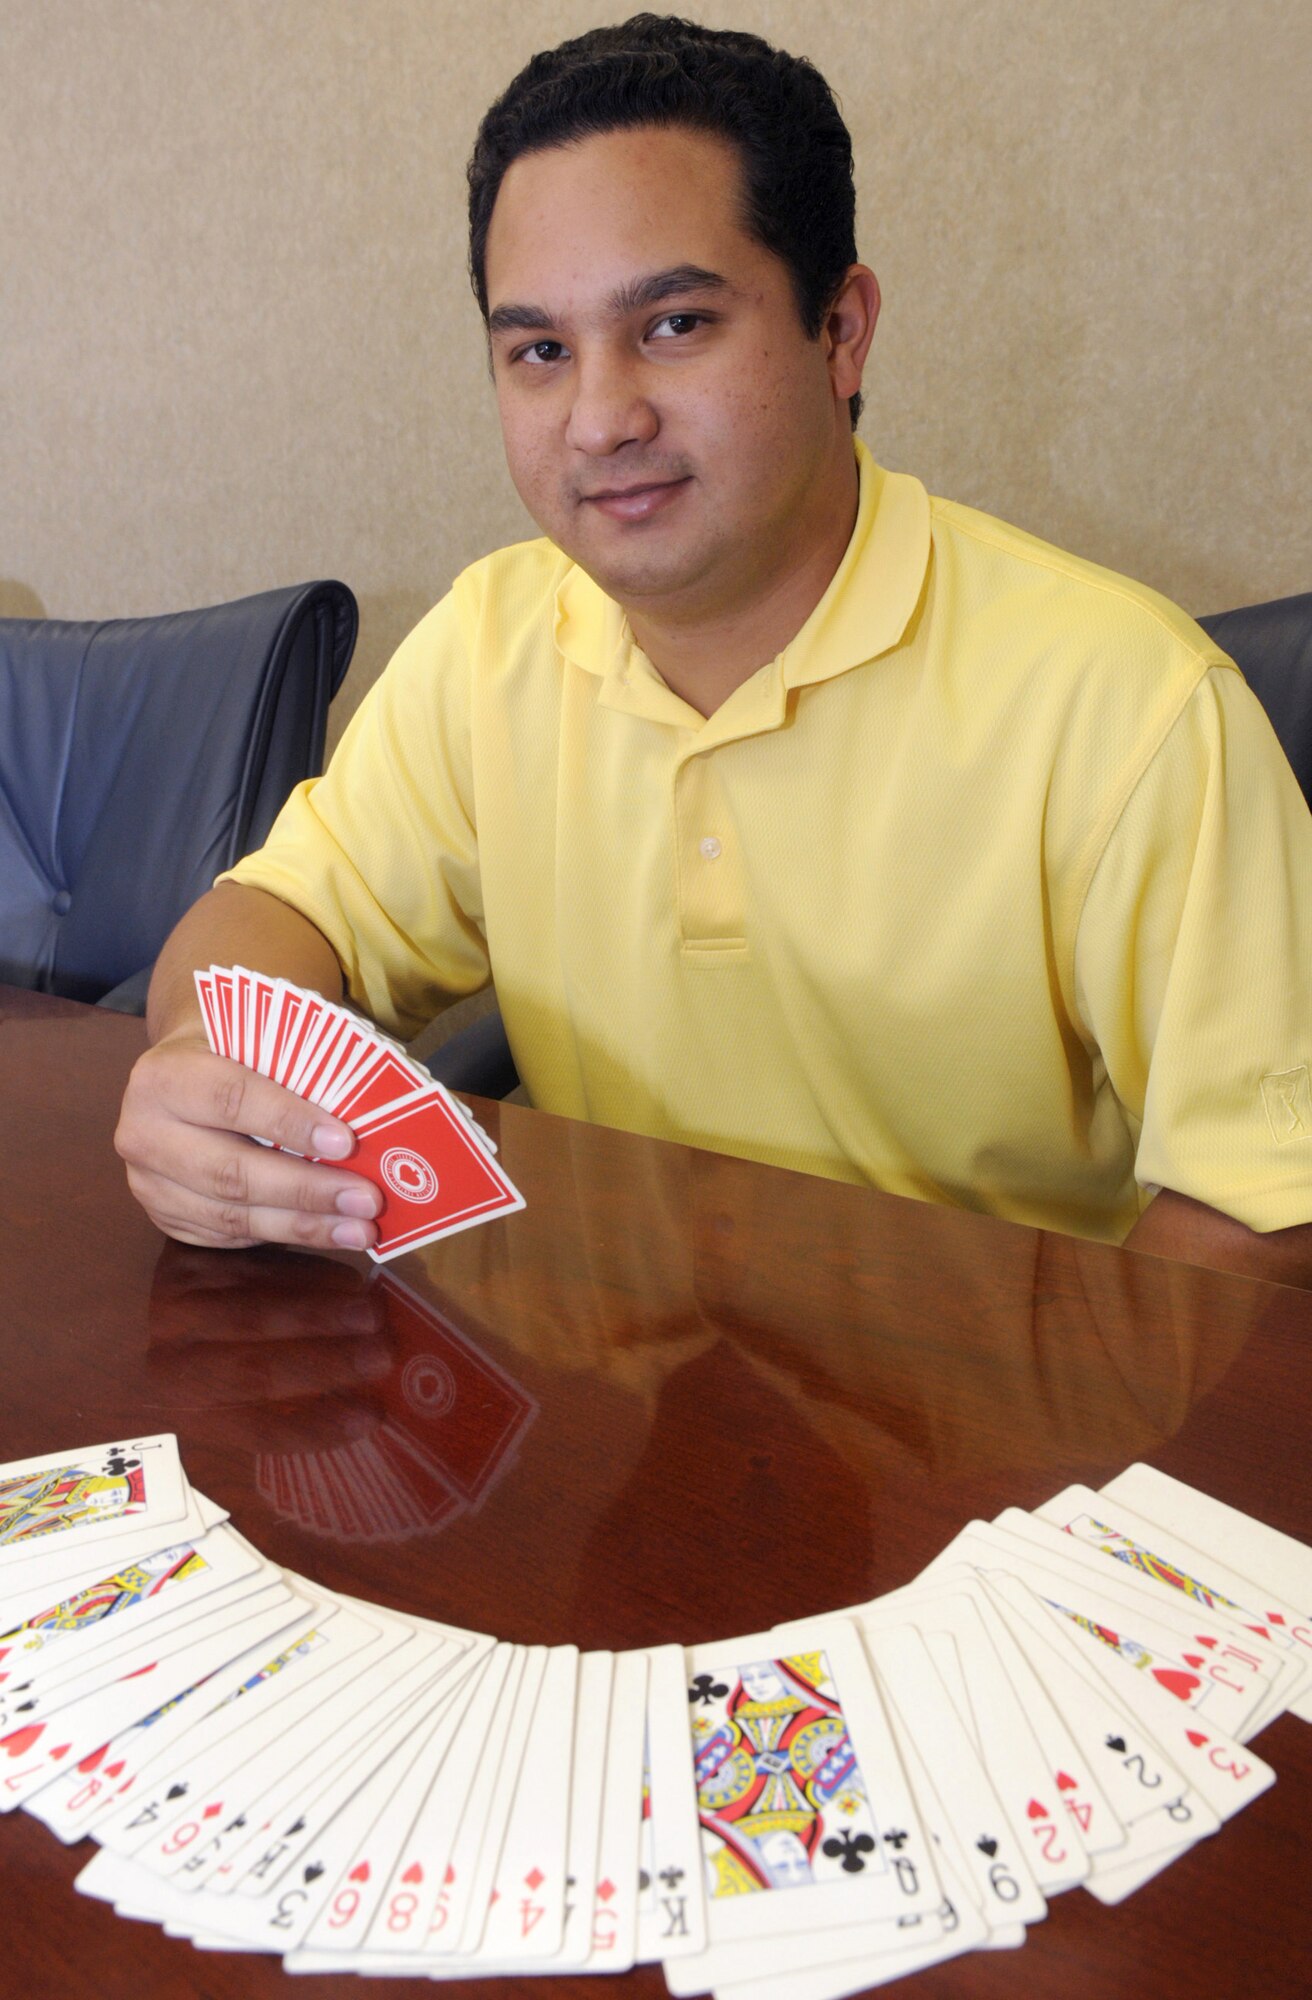 Andre Asbury,an electrical engineer in the 579th Software Maintenance Squadron, is a master bridge player. He's also a certified teacher and is working diligently to build interest in the the card game among youth. (U. S. Air Force photo by Sue Sapp)